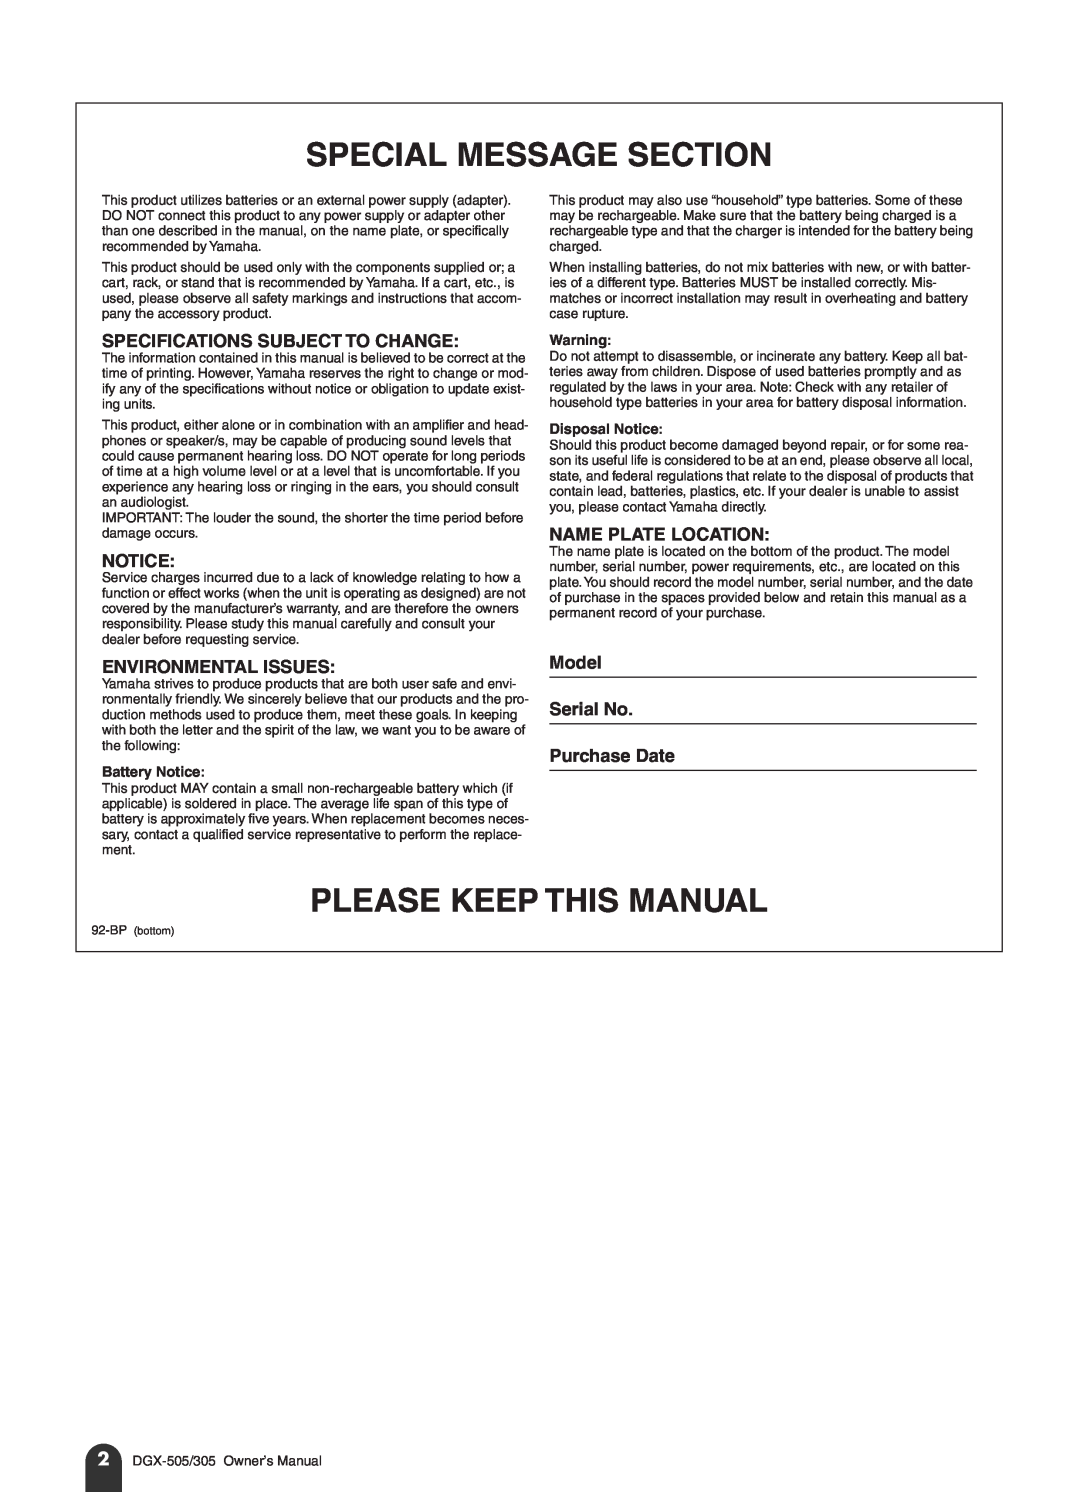 Yamaha DGX-505 Special Message Section, Please Keep This Manual, Specifications Subject To Change, Name Plate Location 